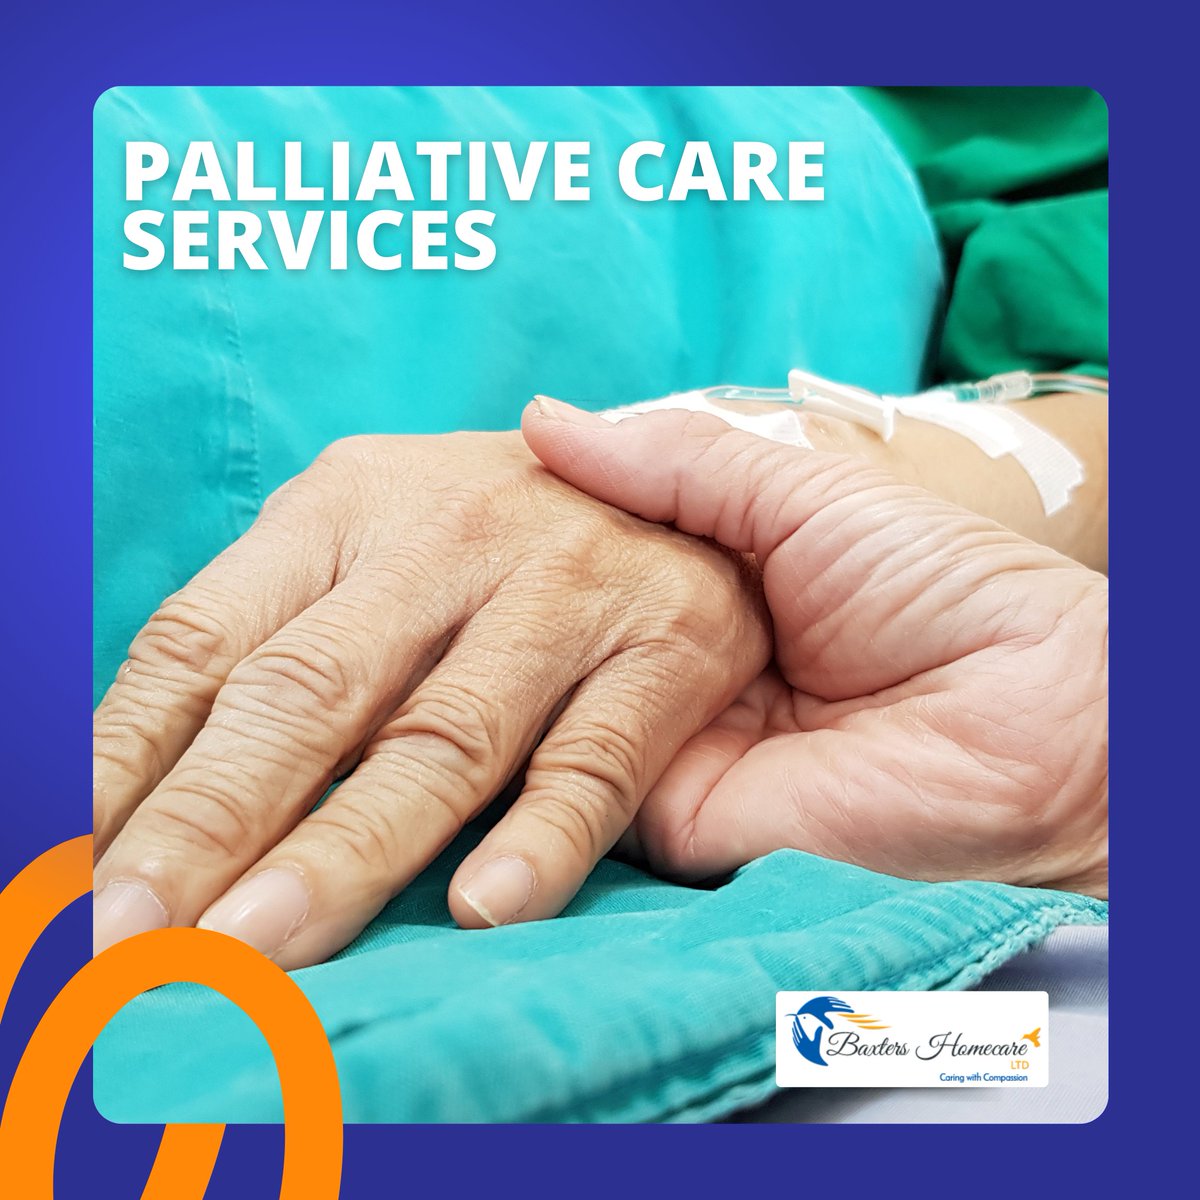 As providers of Palliative Care, we're dedicated to supporting individuals and families through some of life's most challenging moments.

#PalliativeCareUK #EndOfLifeSupport #BaxtersHomeCare #ComplexCareuk #carersforhire